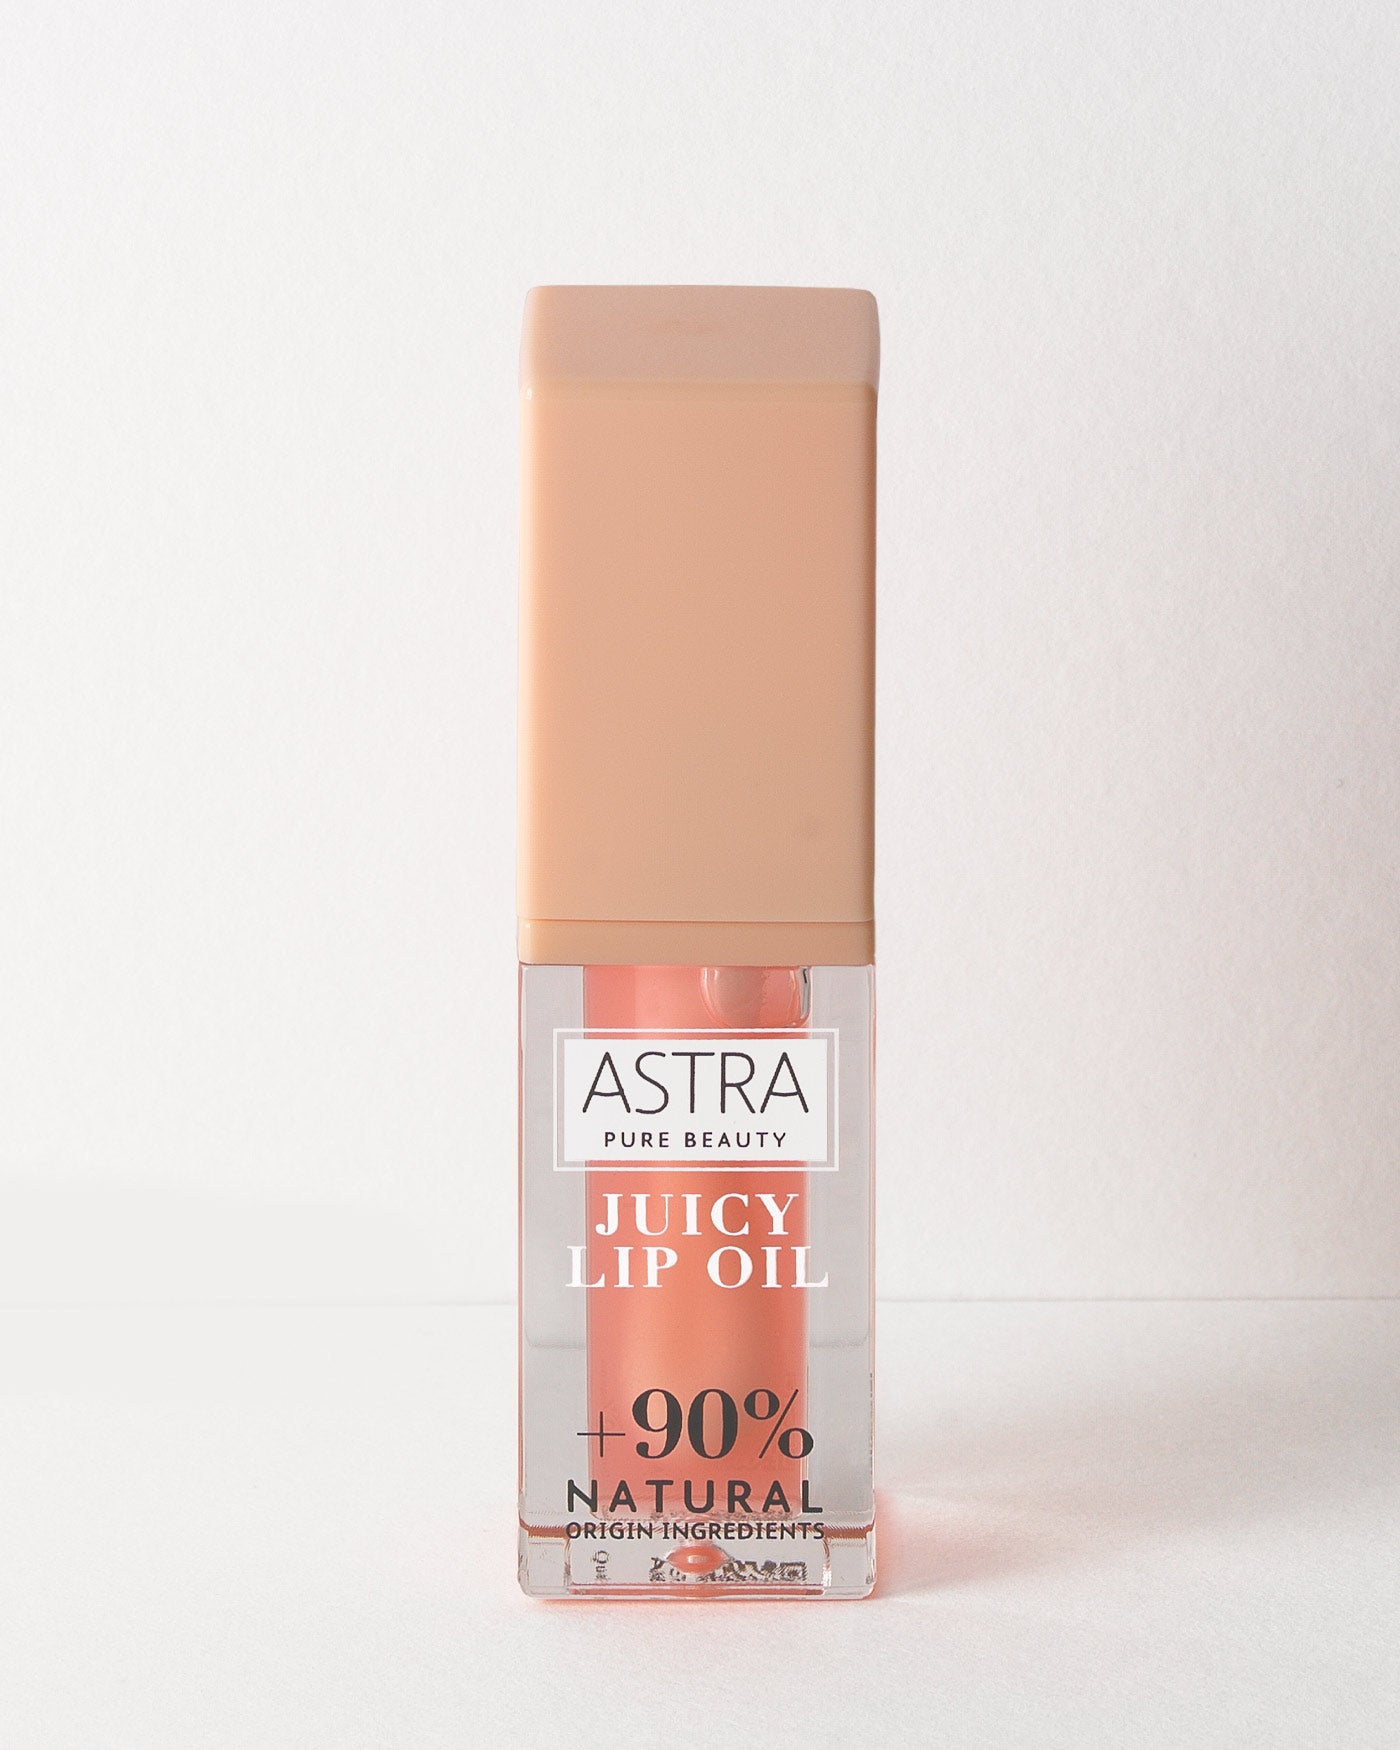 PURE BEAUTY JUICY LIP OIL - 01 - Peach - Astra Make-Up